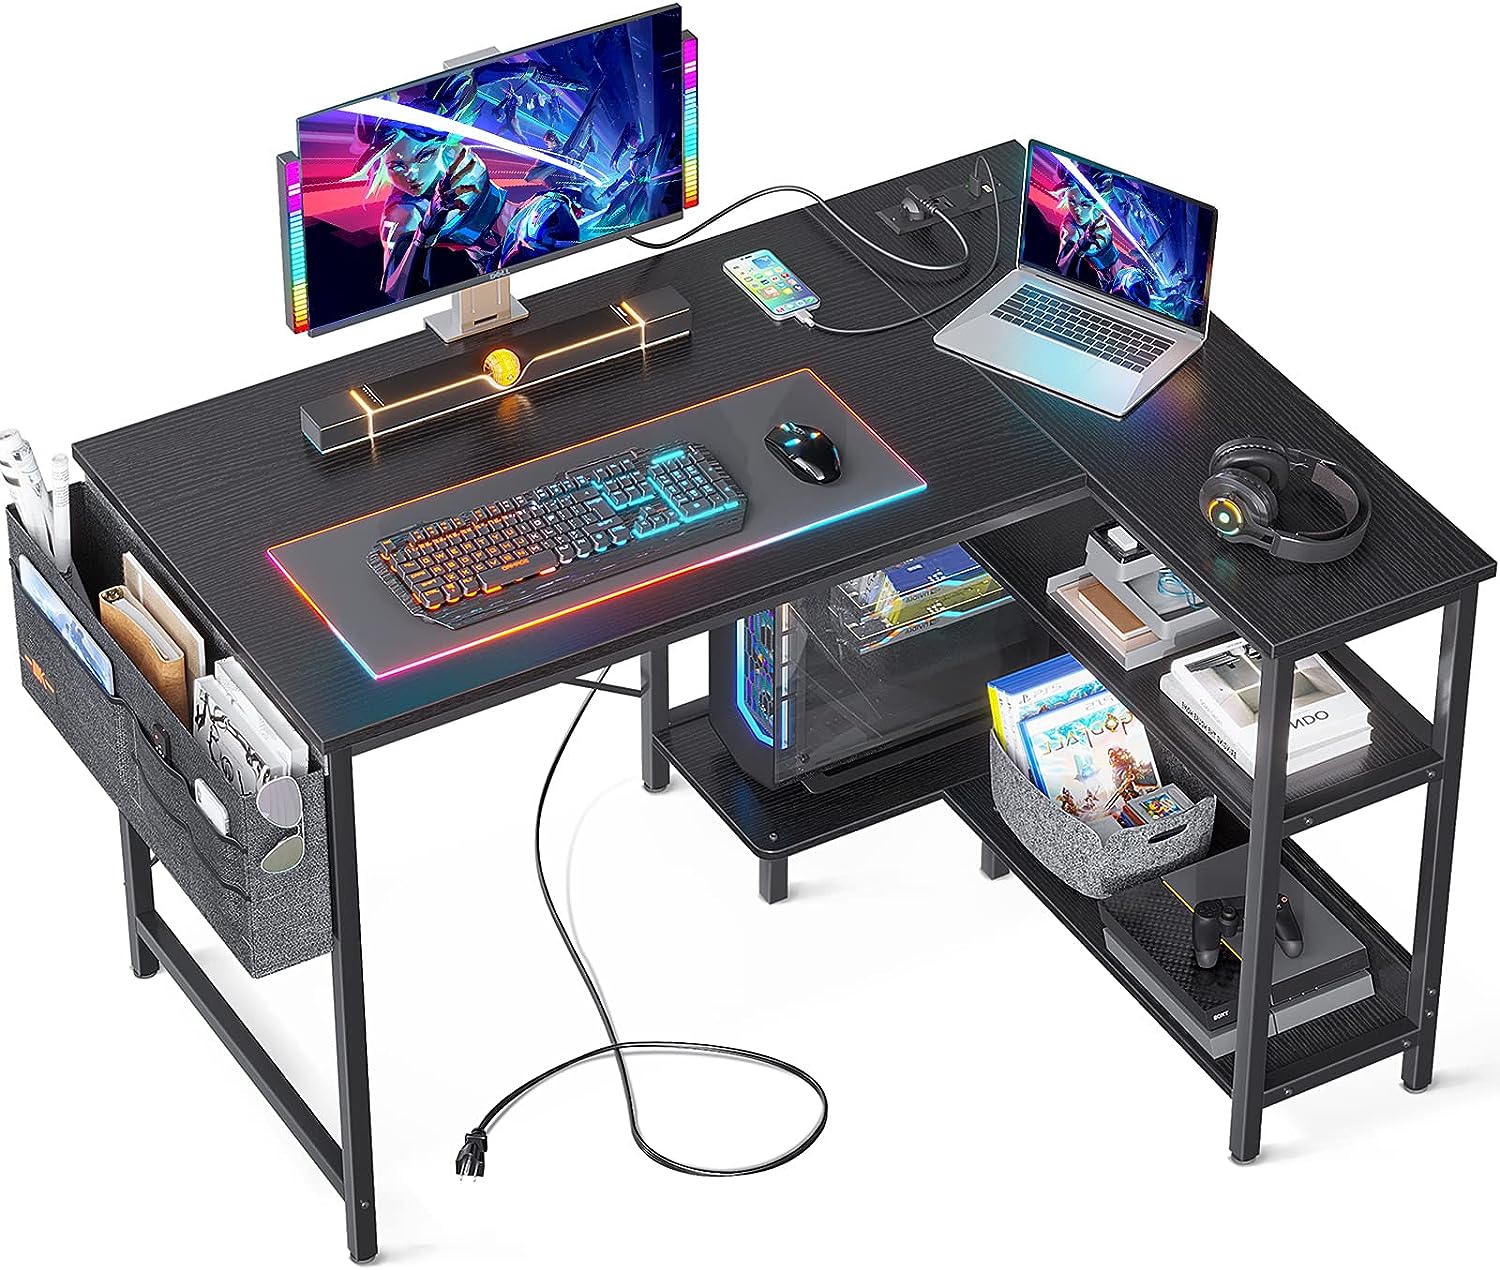 ODK 40 Inch Gaming Computer Desk Review